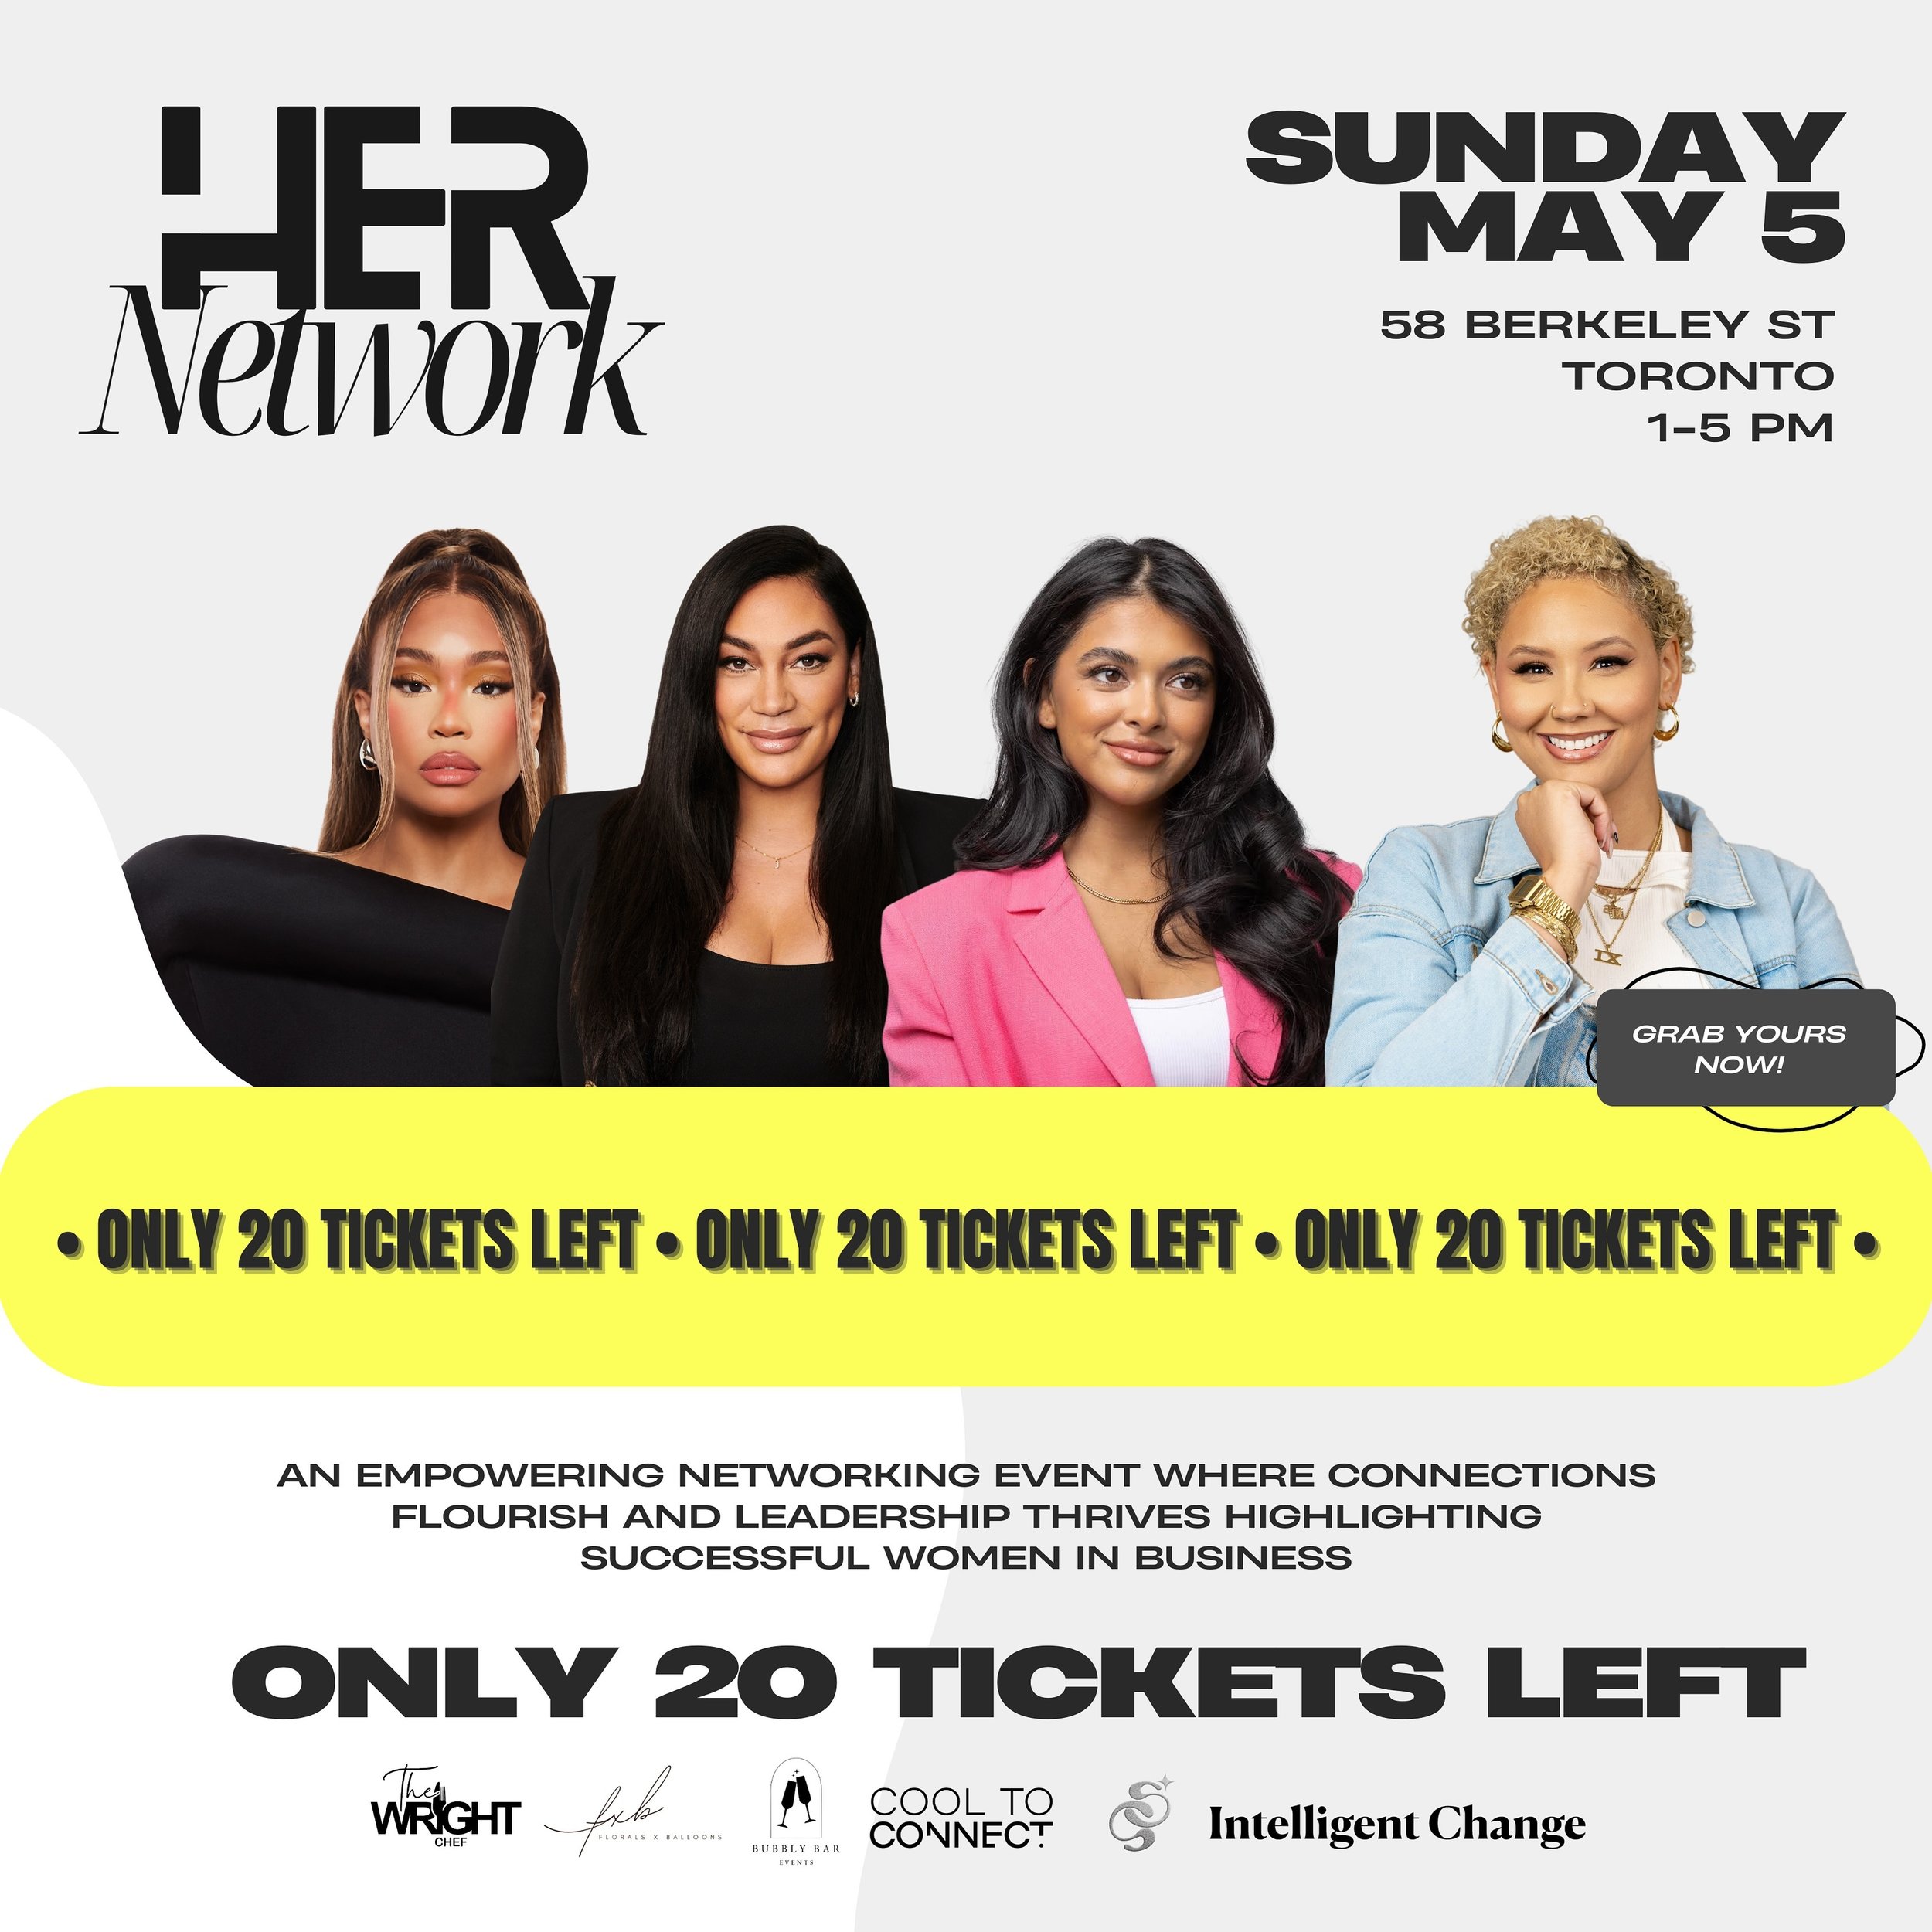 HER NETWORK✨ SUNDAY MAY 5TH IS THE BIG DAY!!!

Only 20 tickets left to join us!!! What are you waiting for?!!! RUNNNNNN 🏃🏽&zwj;♀️&amp; CHECKOUT ASAP! 💖🛒

DM US for a special code (GRAB YOUR TICKET NOW AT THE LINK IN OUR BIO) 

HER NETWORK is an e